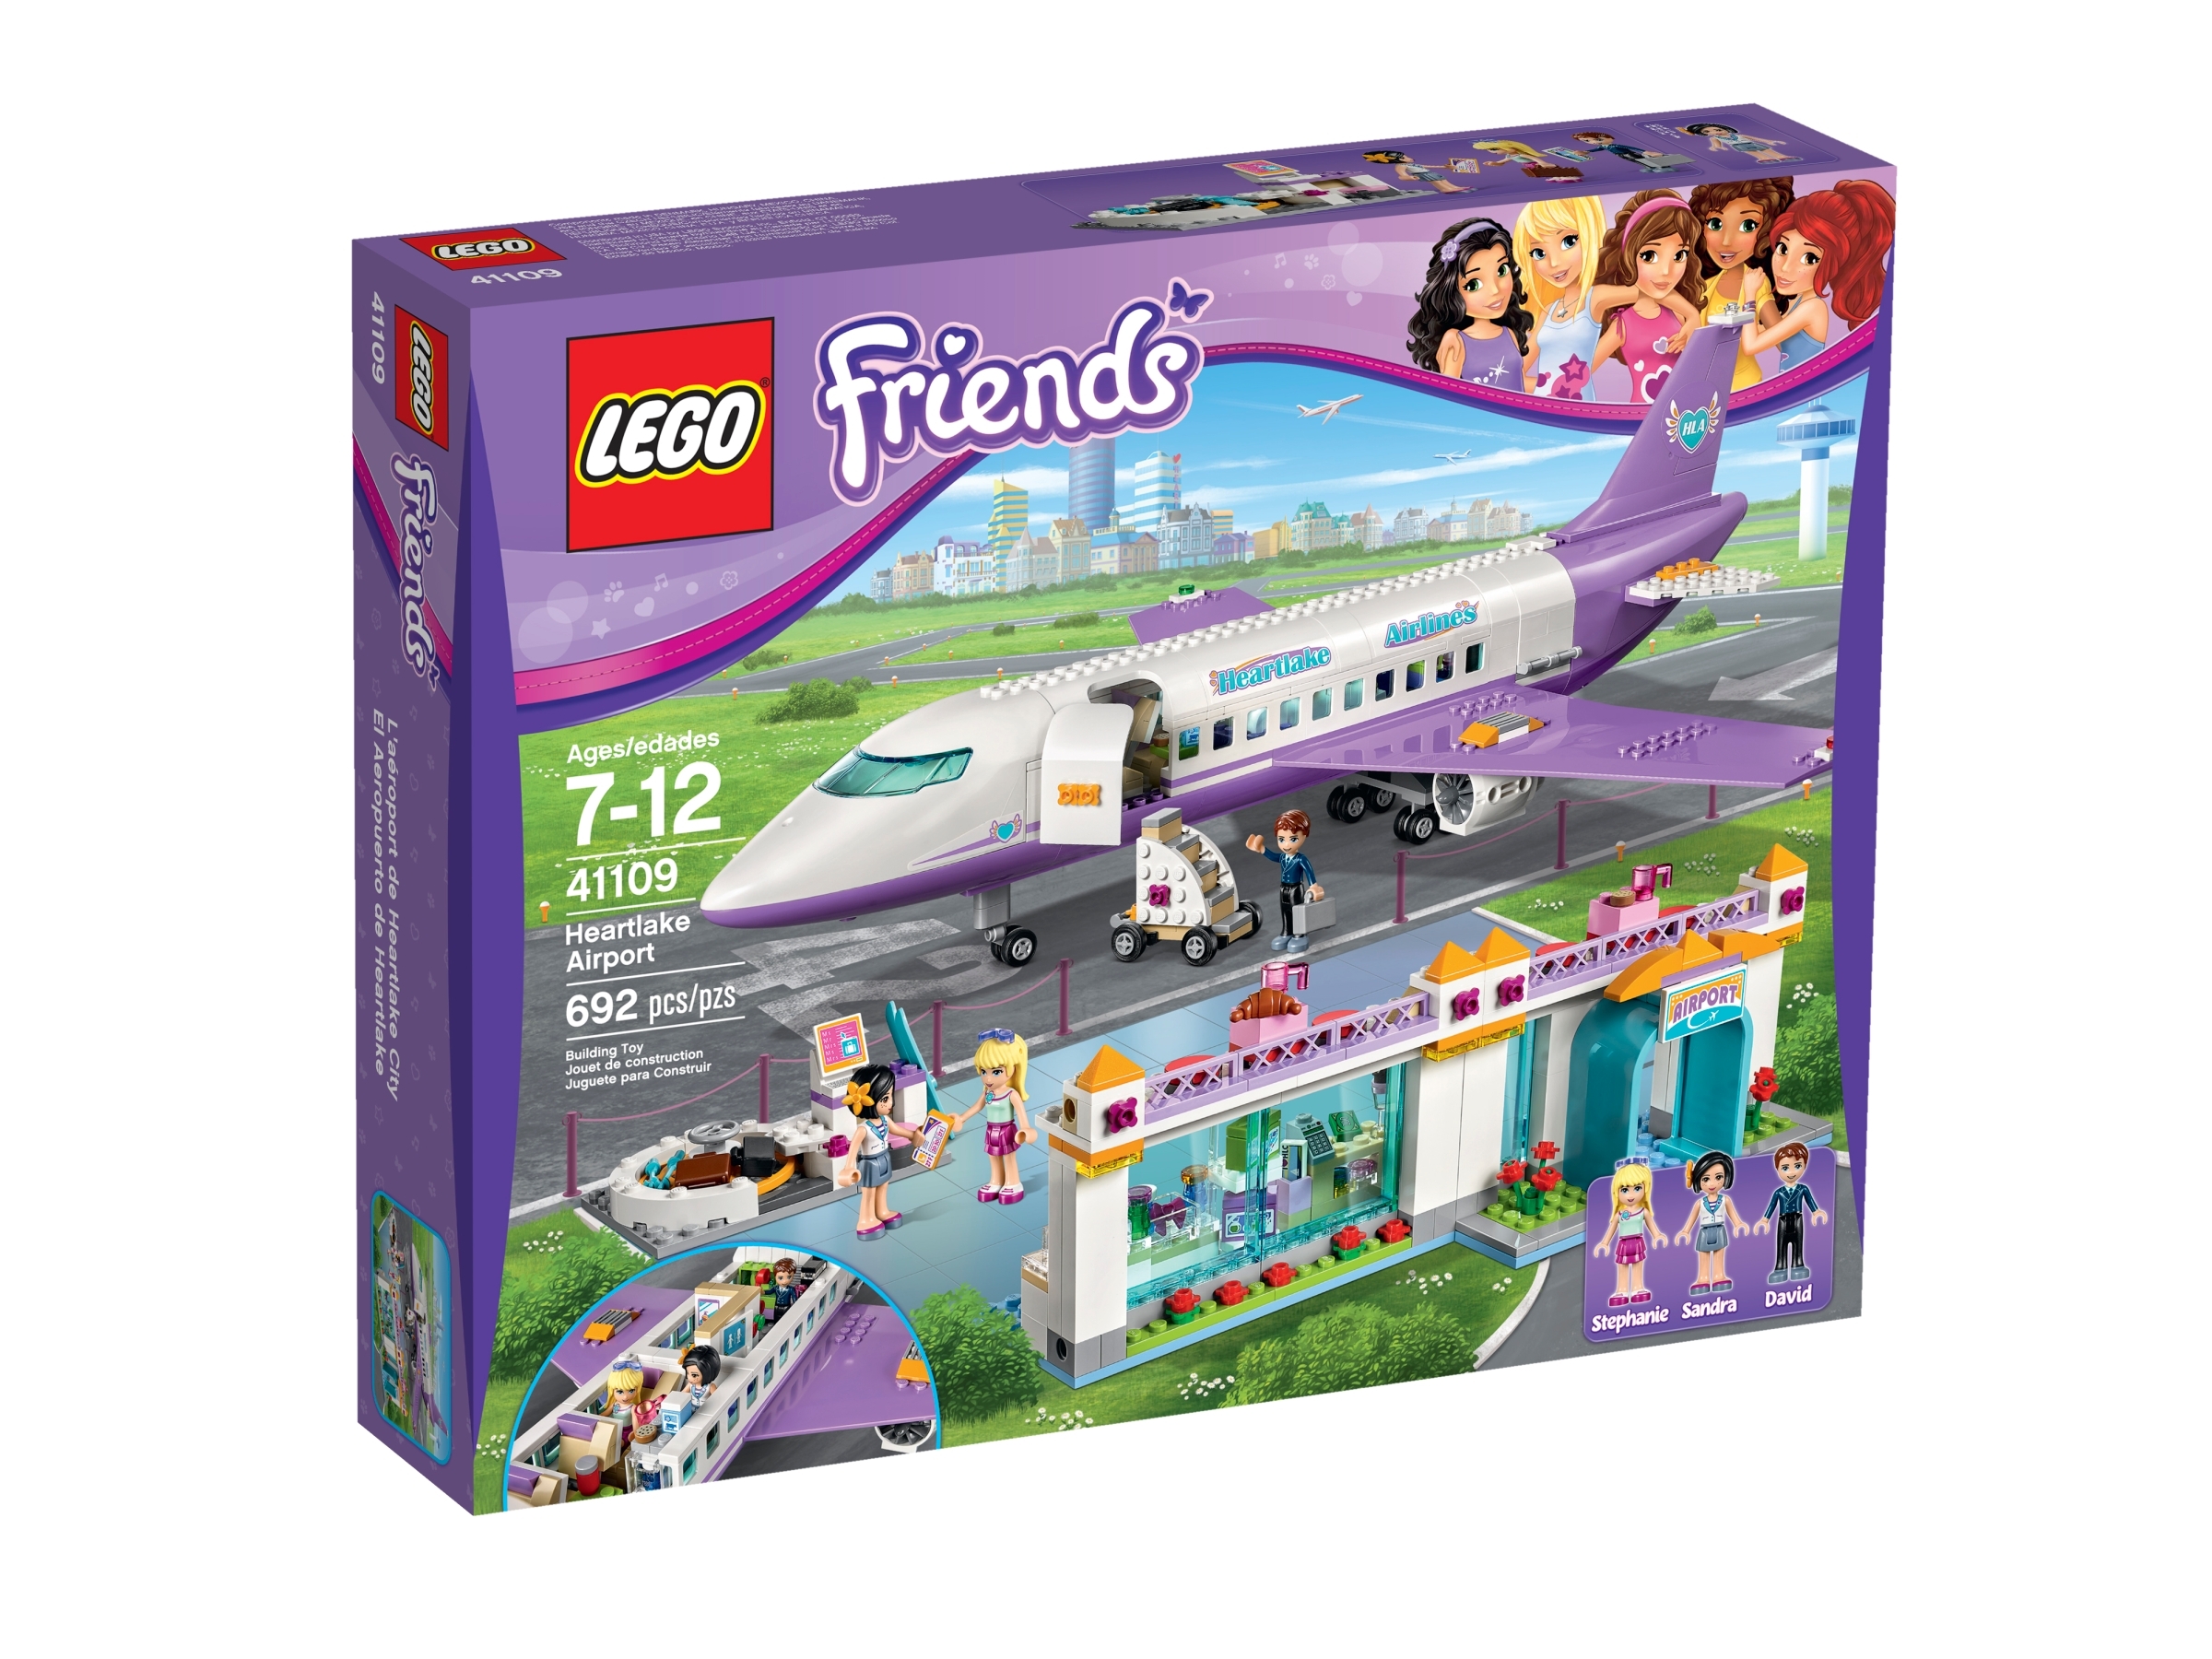 lego friends airplane instructions 41109